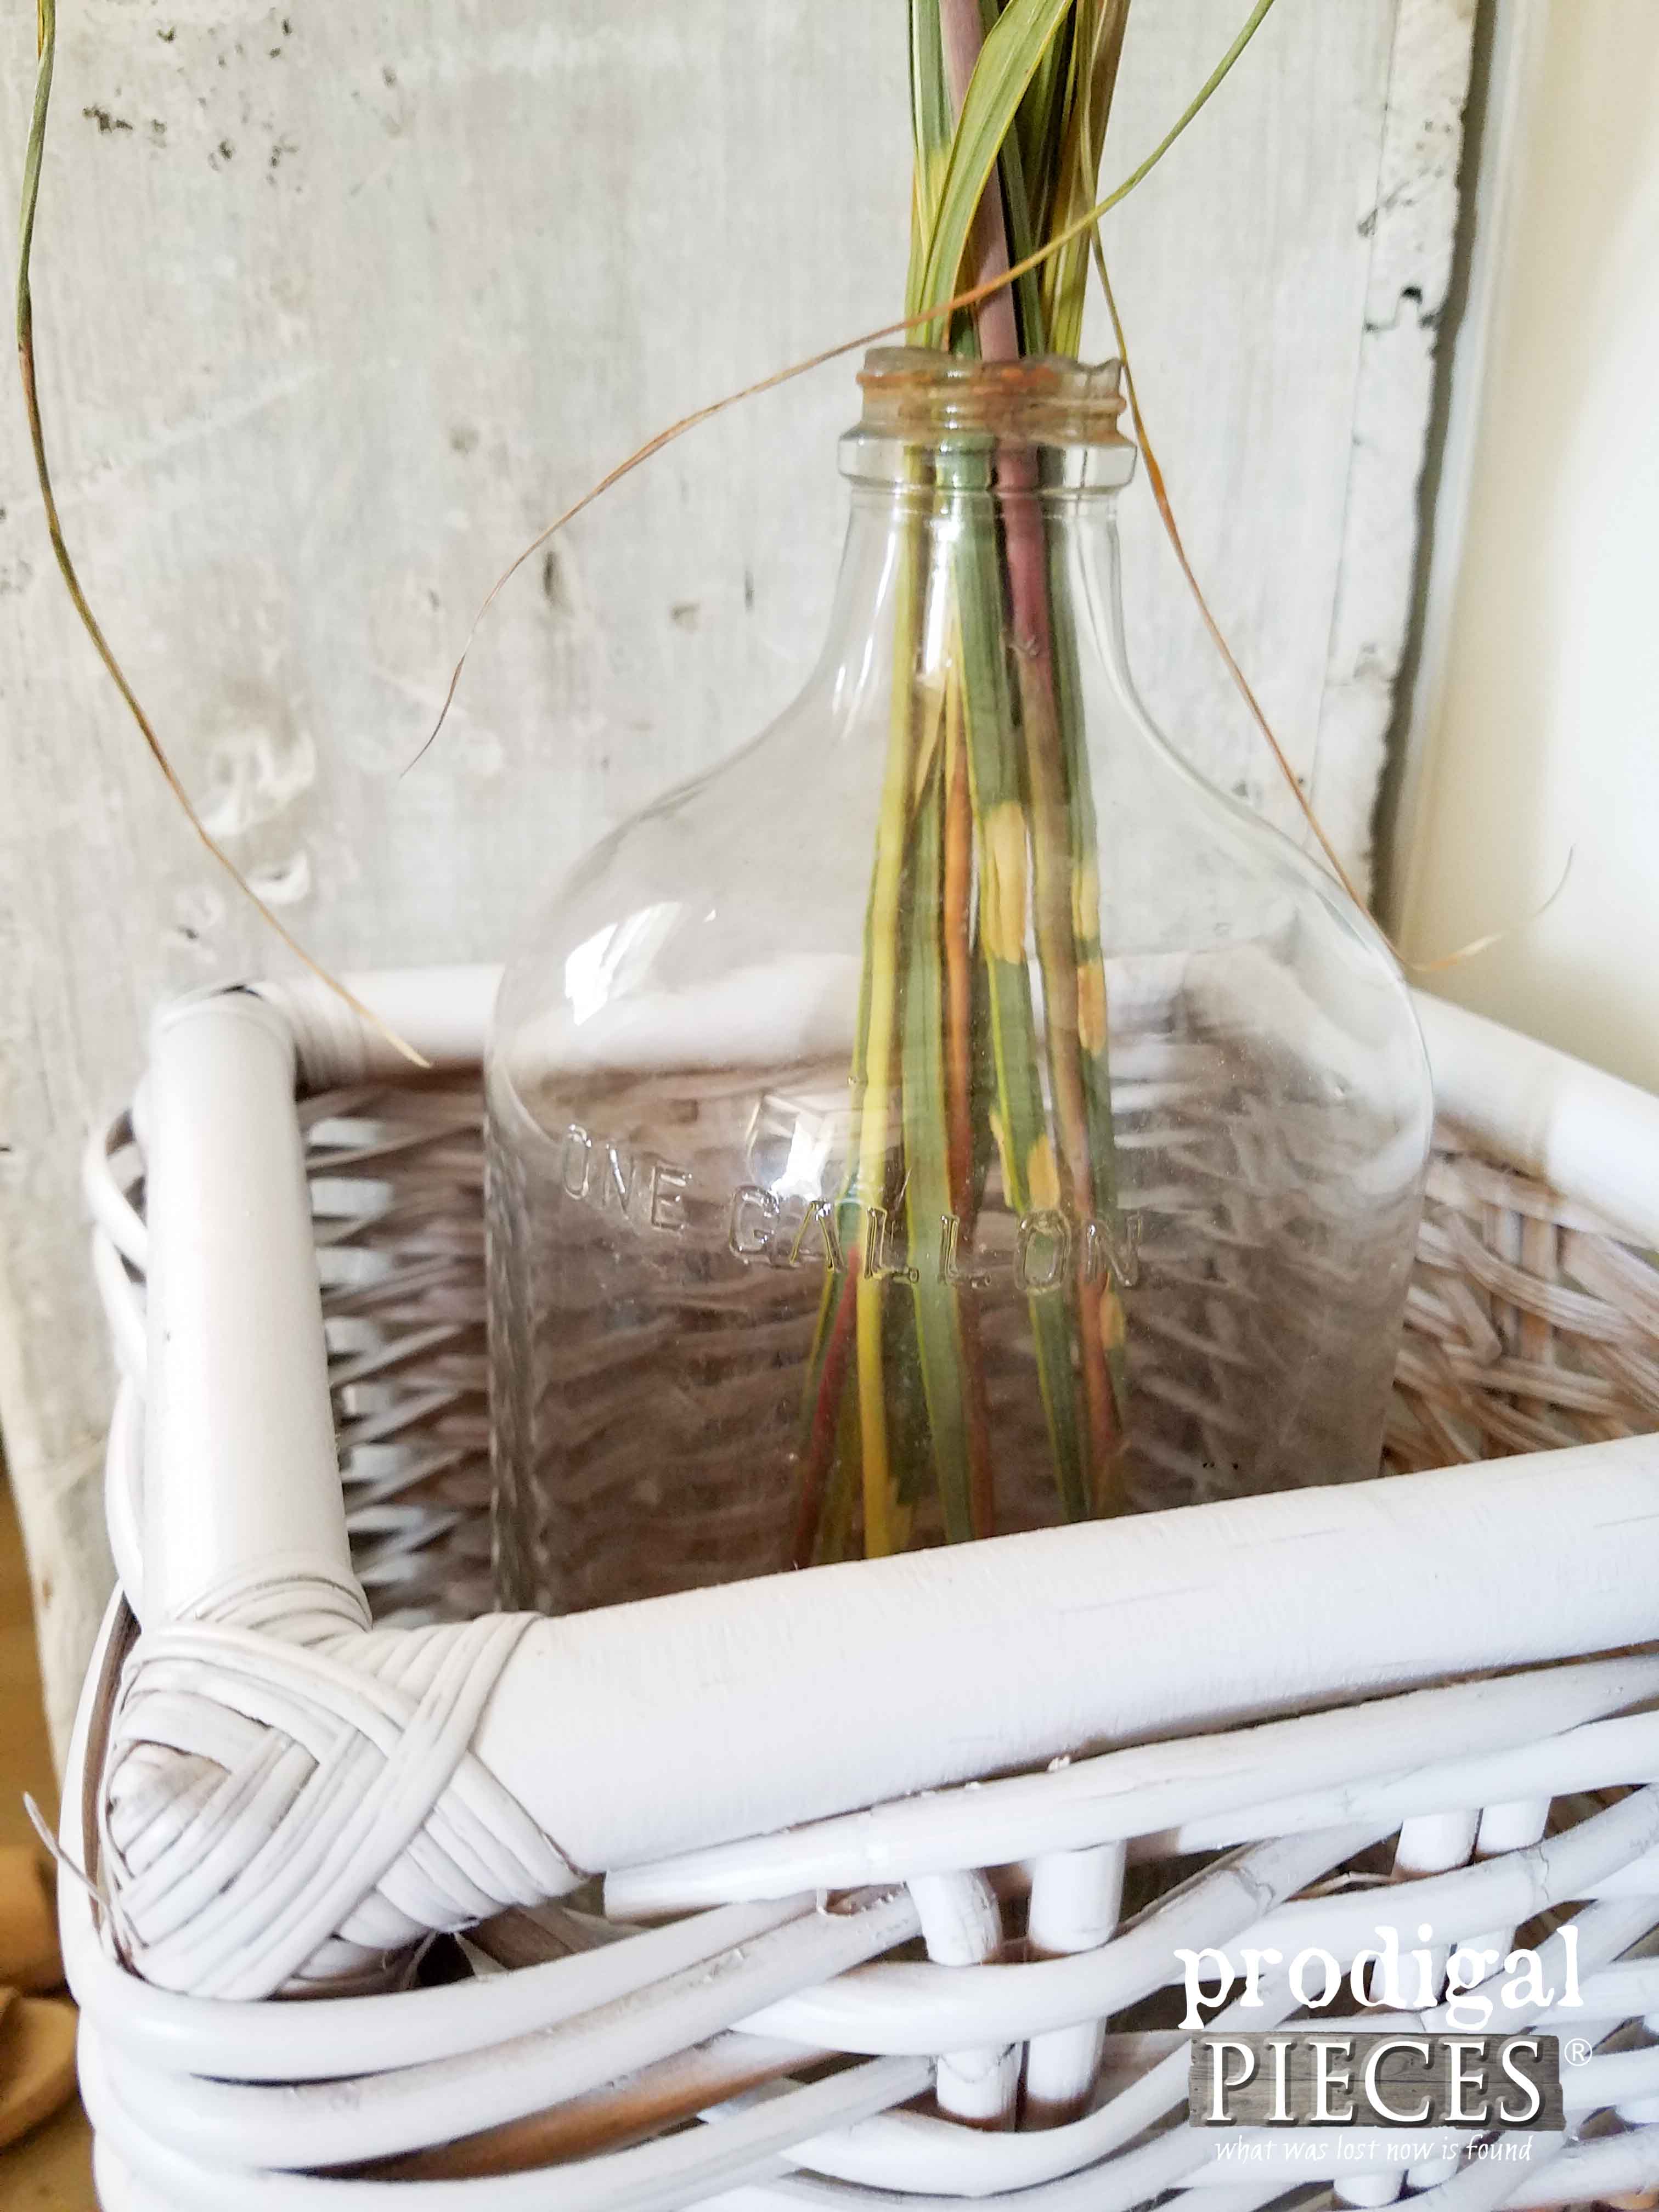 Repurposed Gallon Glass Jar to Hold Natural Grass Display | Prodigal Pieces | www.prodigalpieces.com